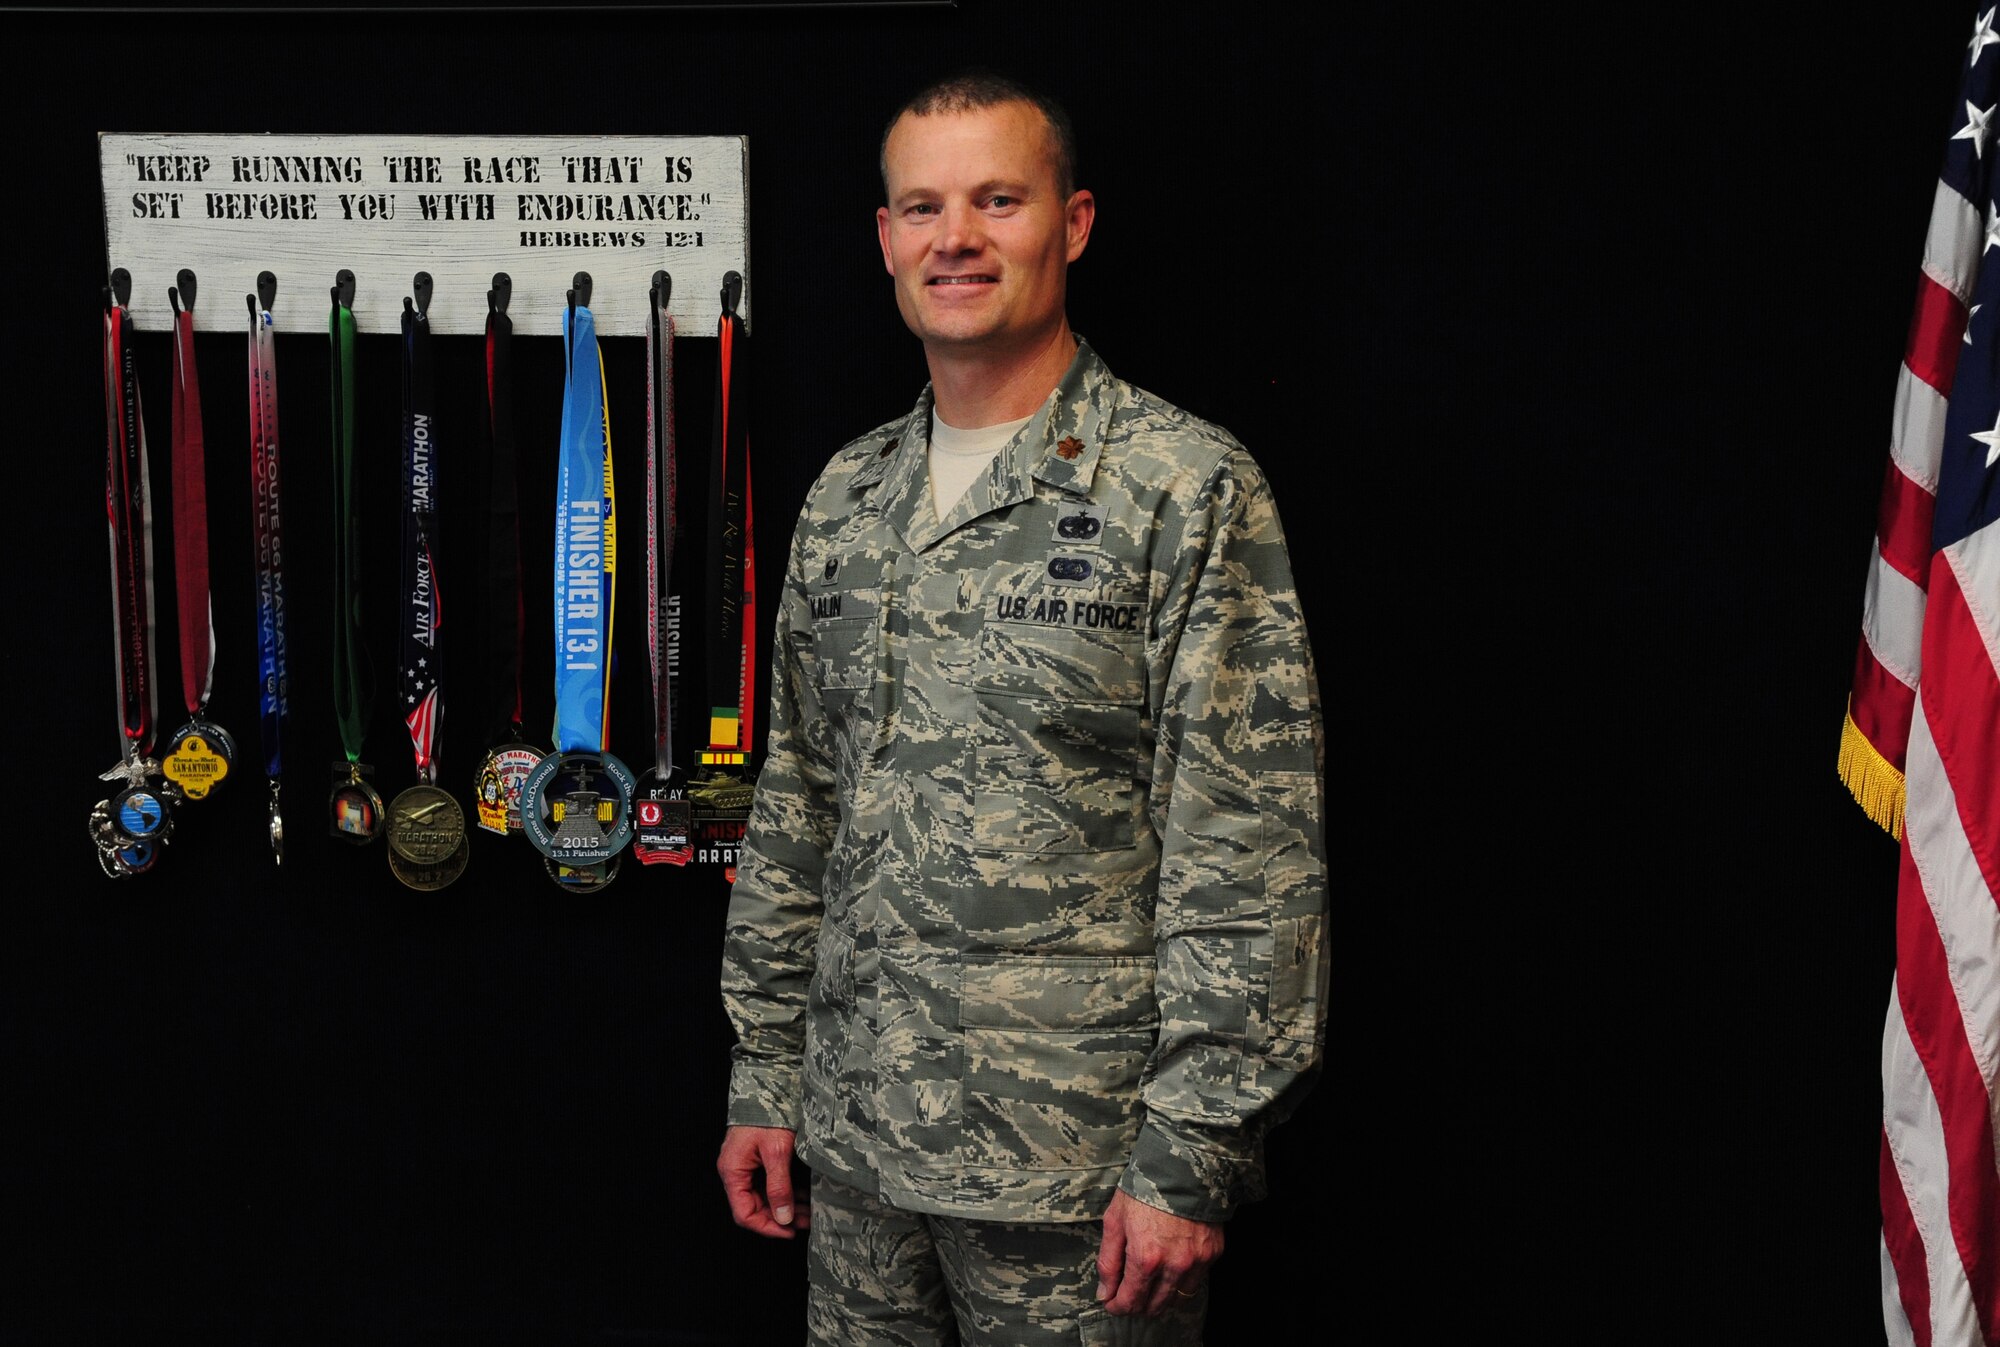 Maj. Jason Kalin, 509th Logistics Readiness Squadron commander, poses in front of his running medals at Whiteman Air Force Base, Mo., April 16, 2015. Kalin has participated and completed one Ultramarathon (63.75 miles), 16 marathons, five half-marathons, two Bataan Death Marches and numerous 10 milers, 10Ks and 5Ks. To culminate his tour at Whiteman, Kalin is taking part in his last race as the commander of the 509th LRS, the Striker Life Half Marathon. (U.S. Air Force photo by Senior Airman Keenan Berry/Released)